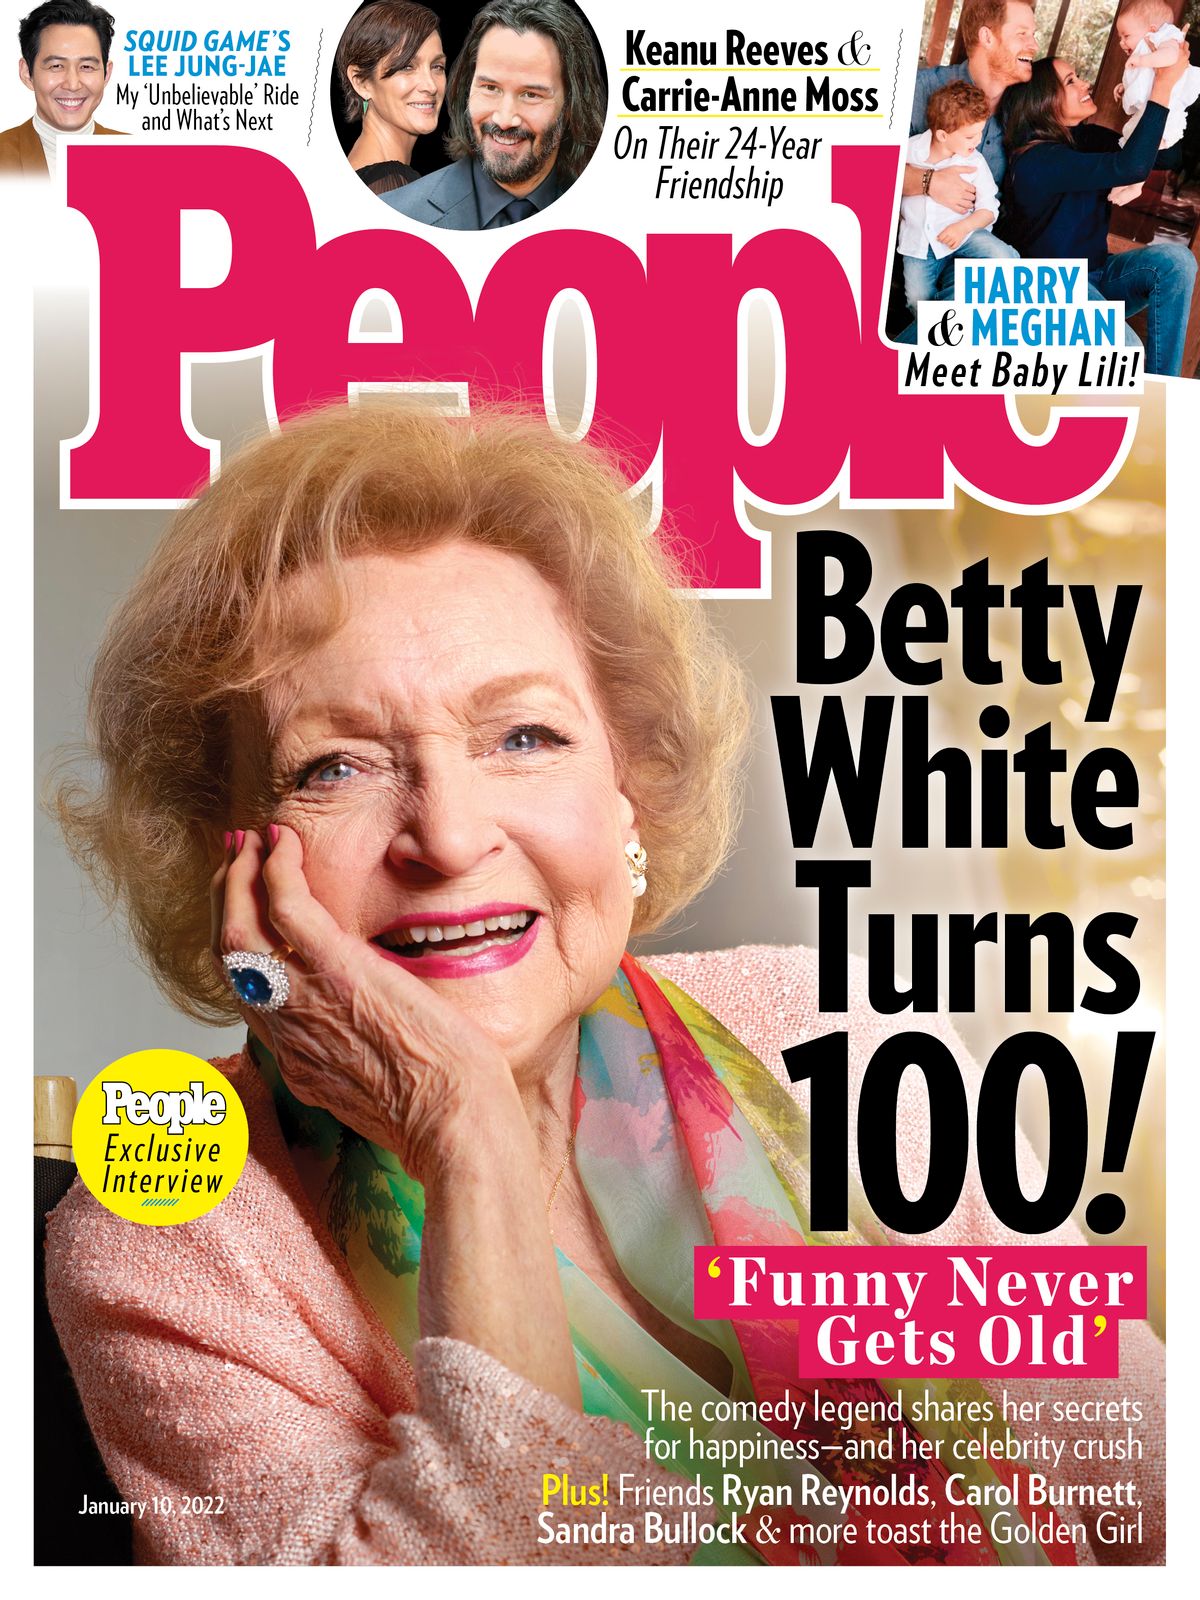 BettyWhitePeopleCover